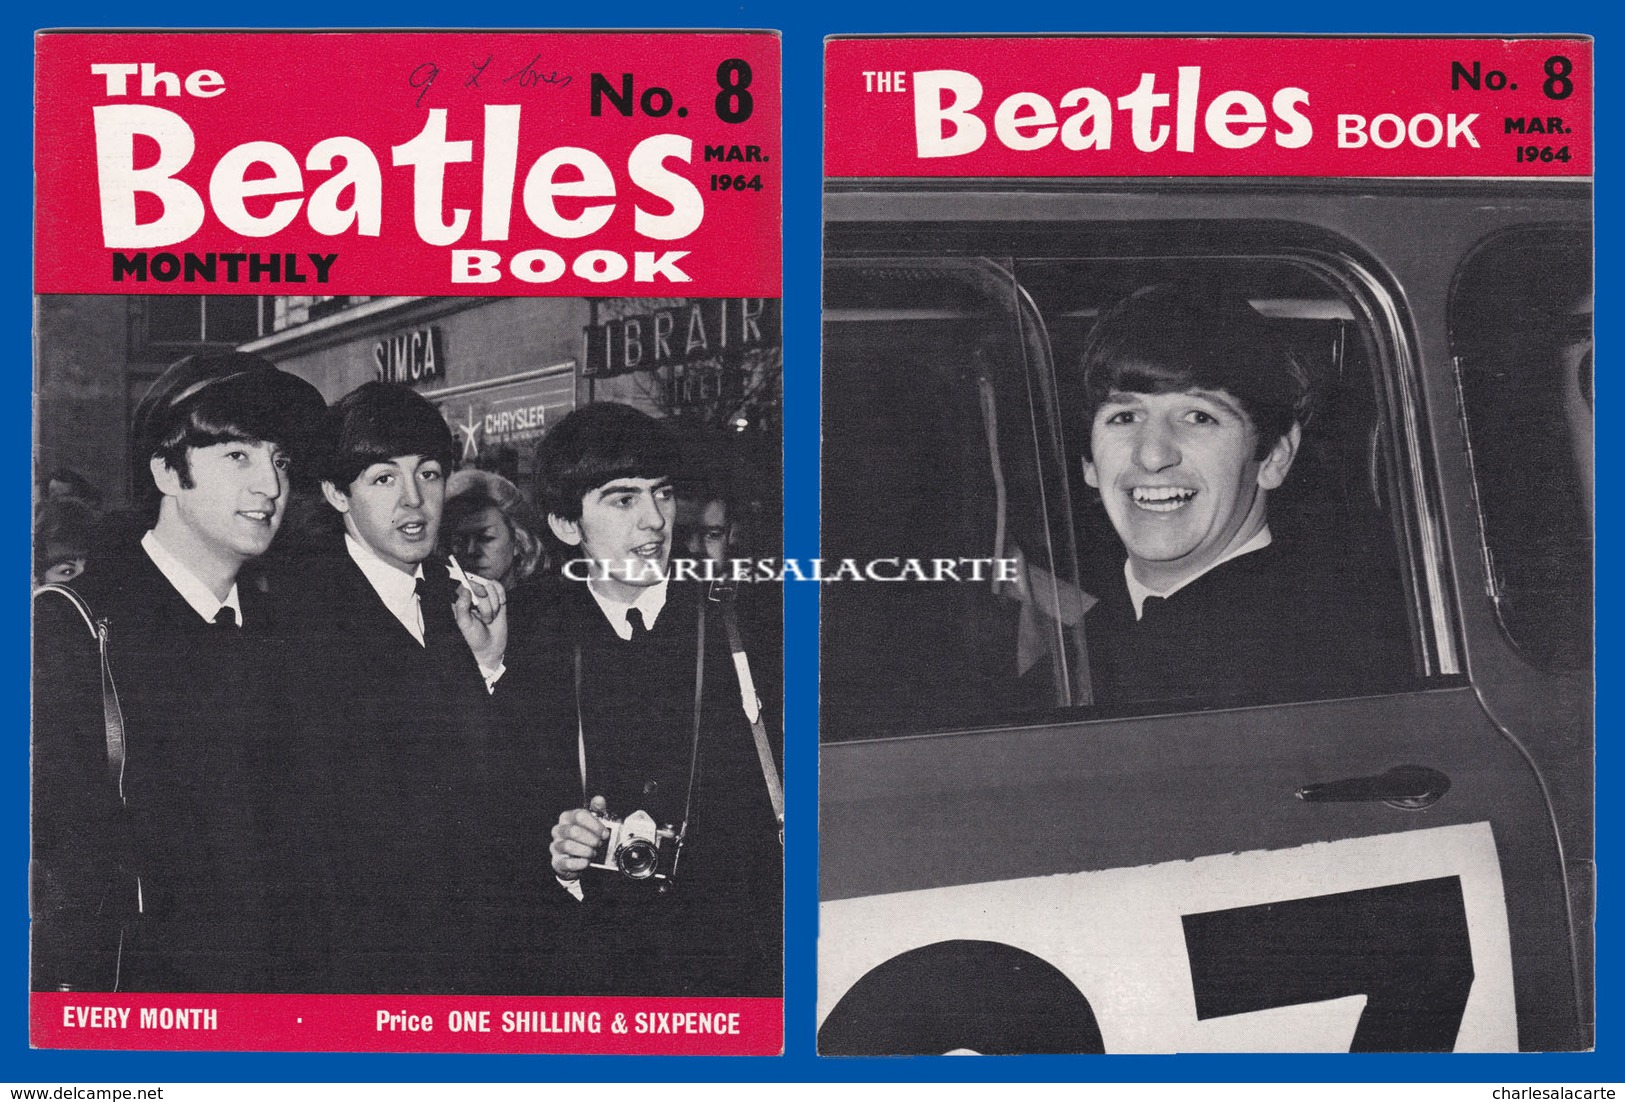 1964 MARCH THE BEATLES MONTHLY BOOK No.8 AUTHENTIC SUBERB CONDITION SEE THE SCAN - Entertainment